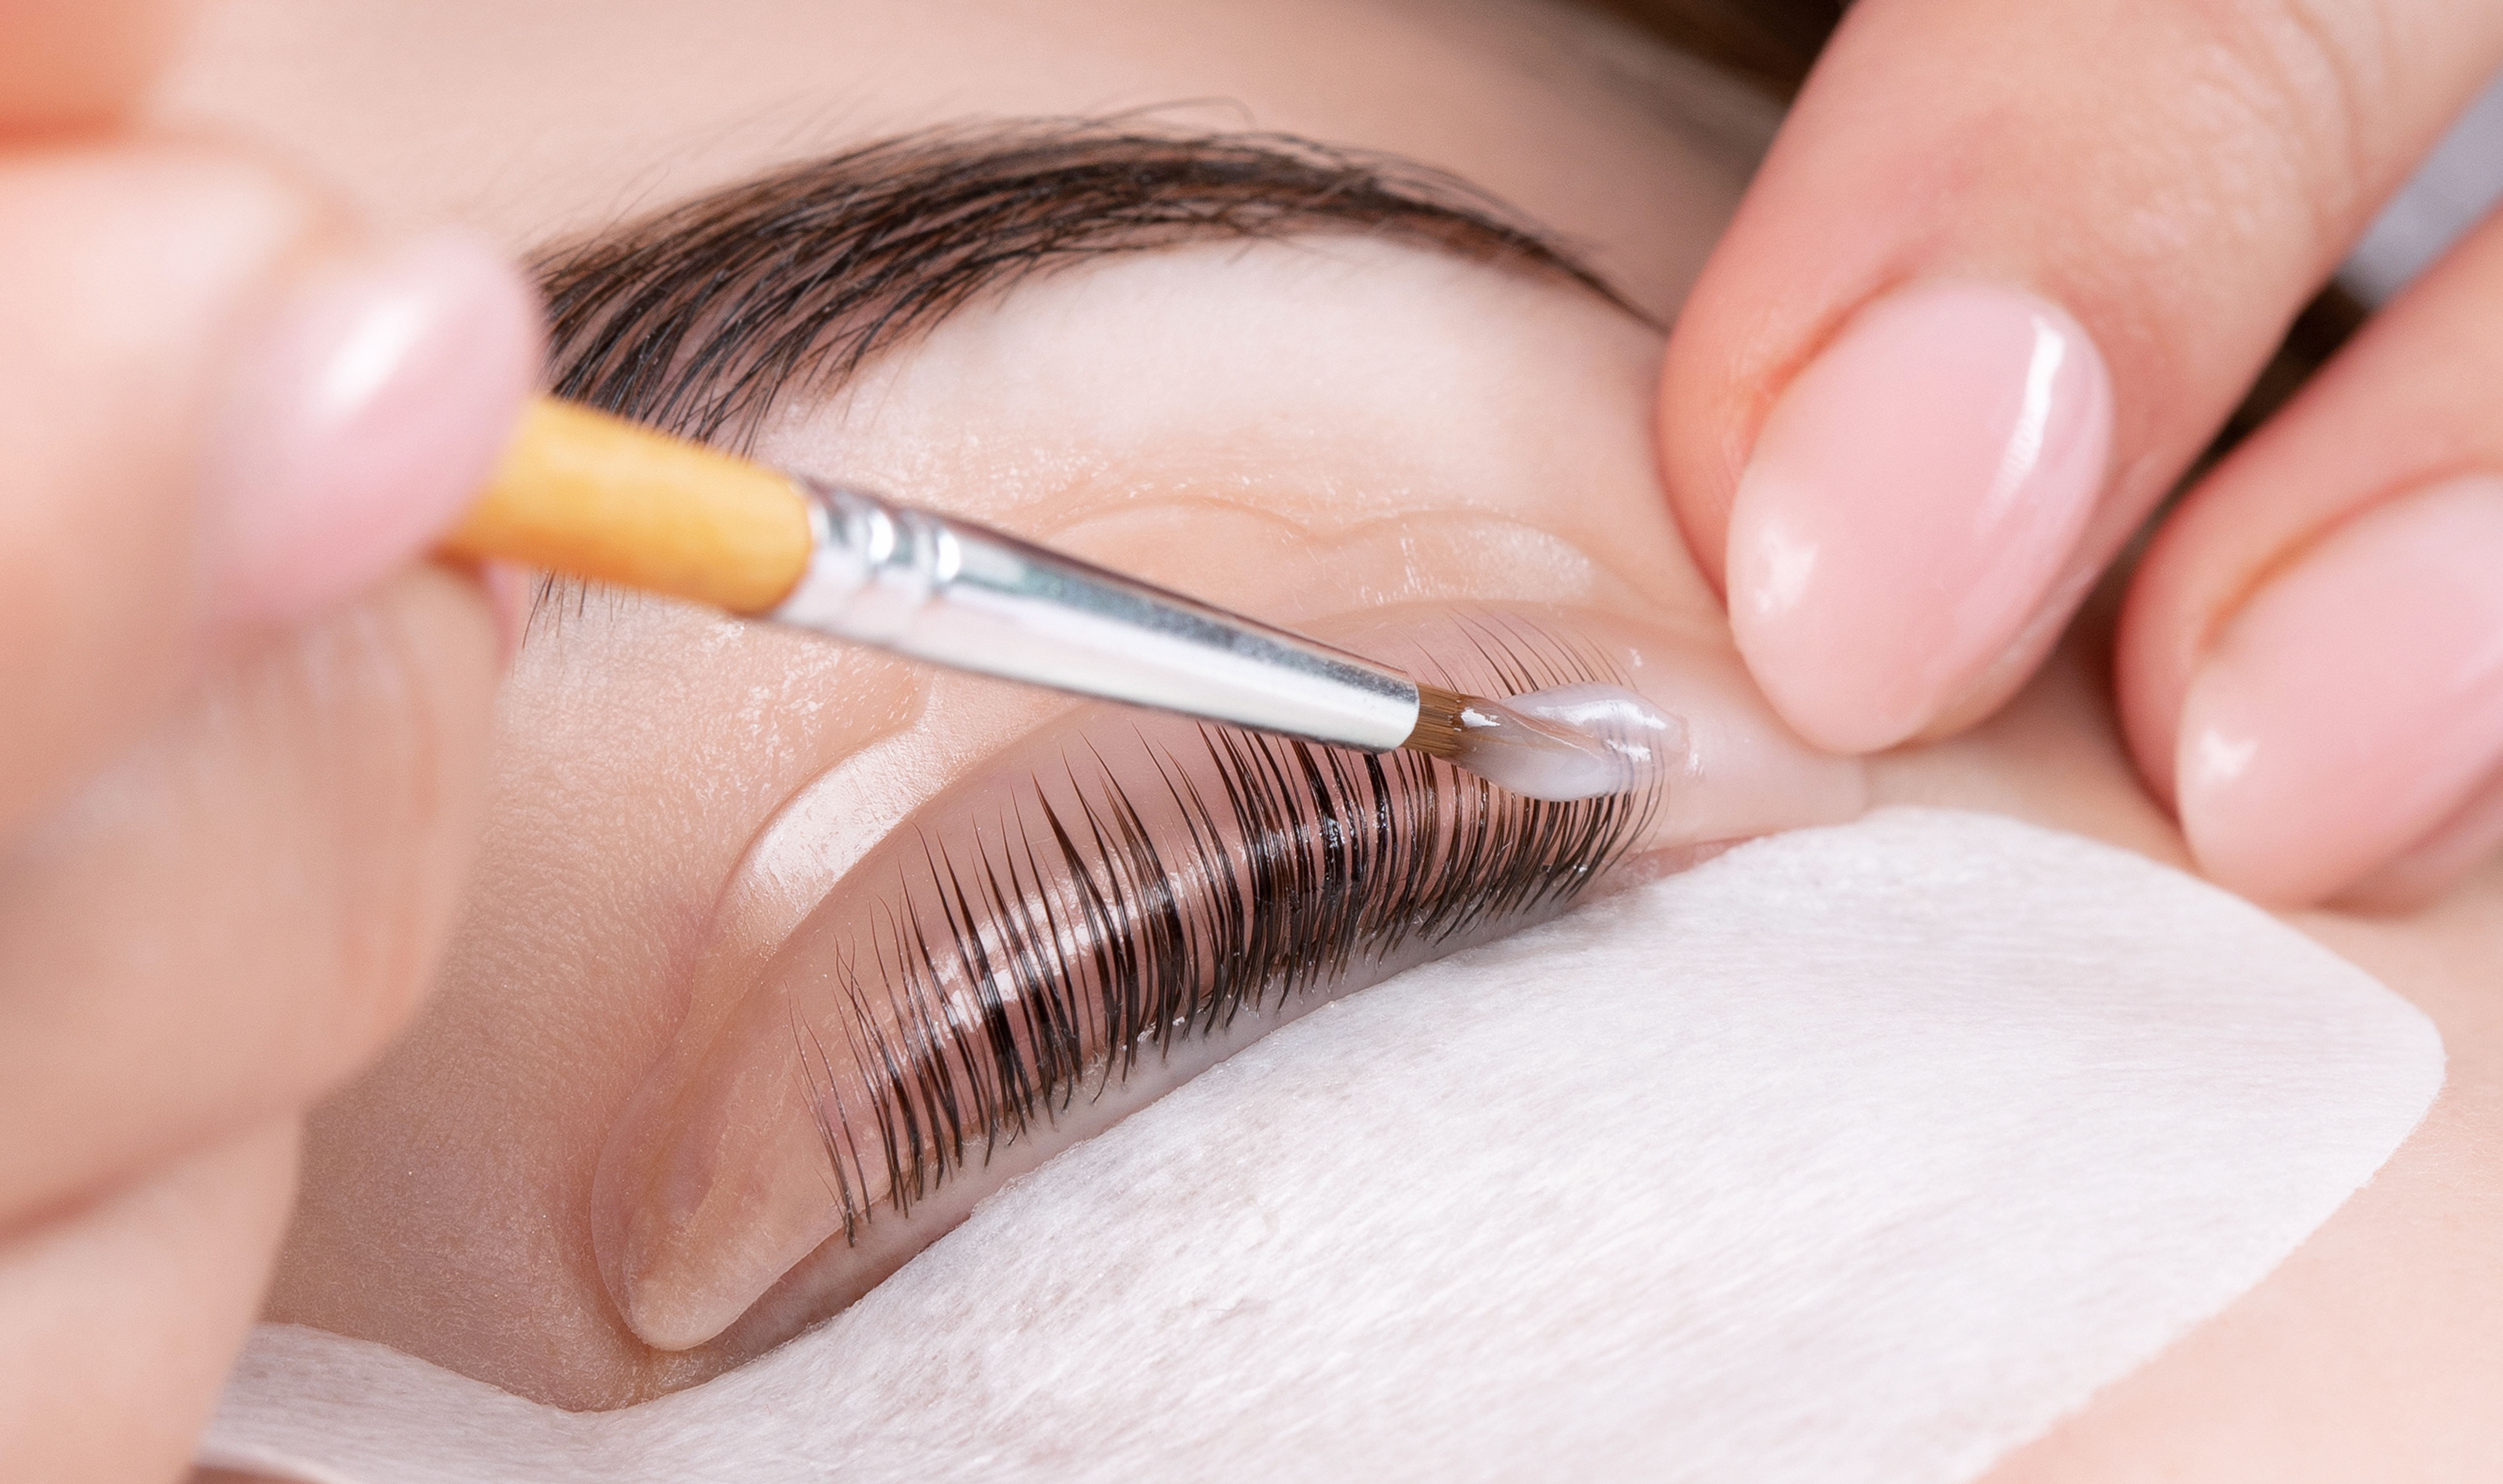 Make-up artist makes the procedure of lamination and dyeing of eyelashes to a beautiful woman in a beauty salon. Eyelash extensions. Eyelashes close-up